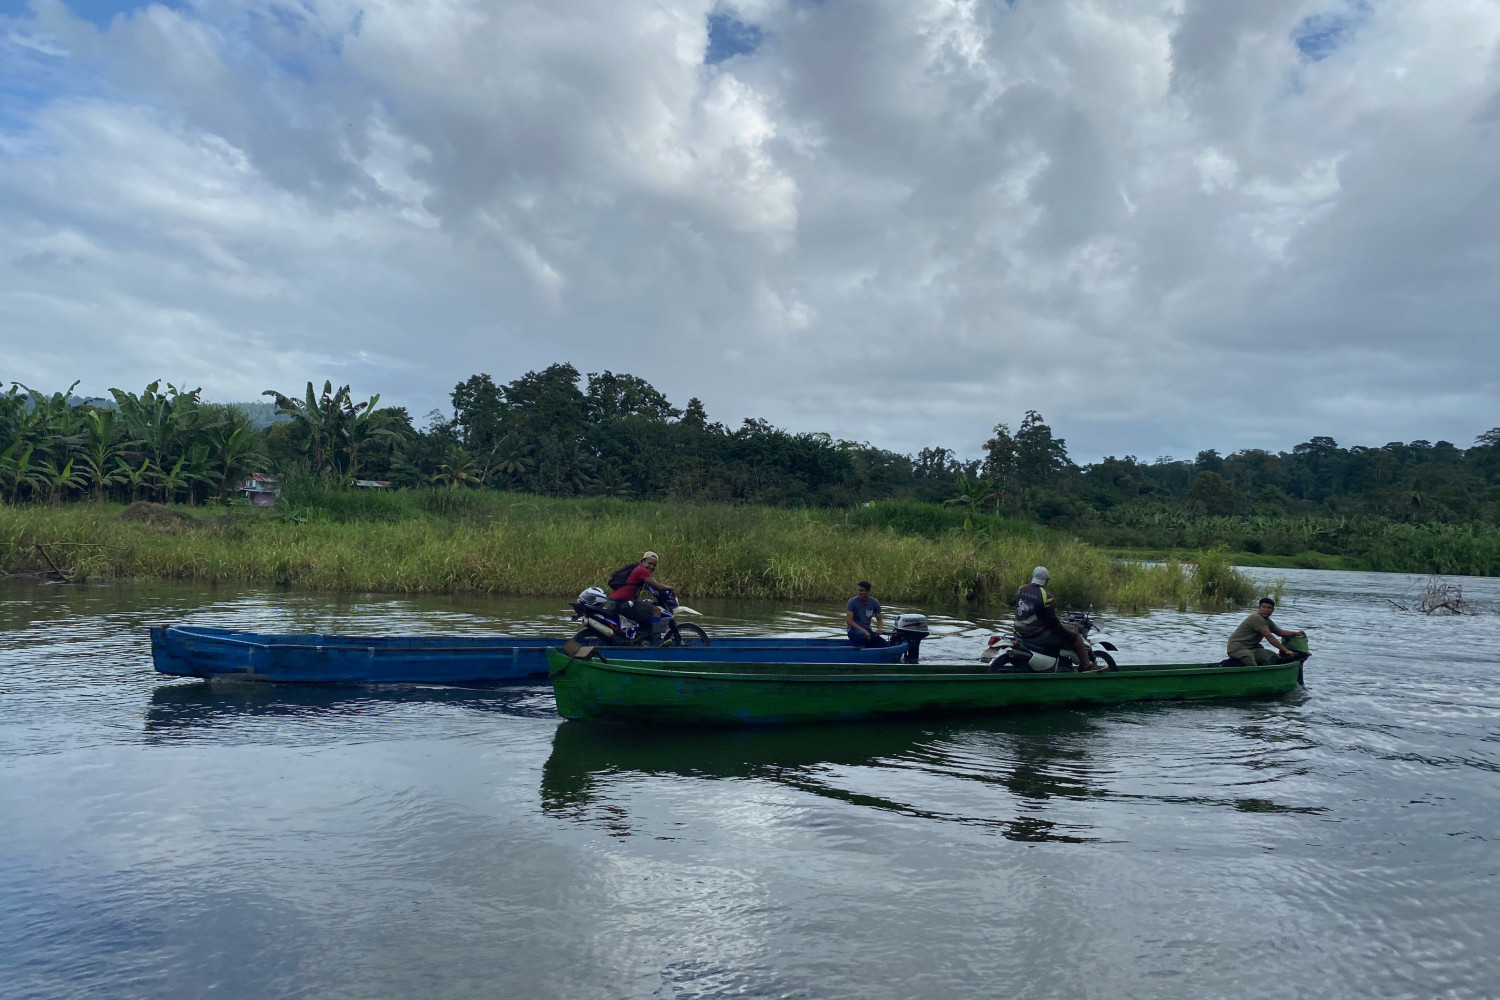 Students travel by river in Costa Rica